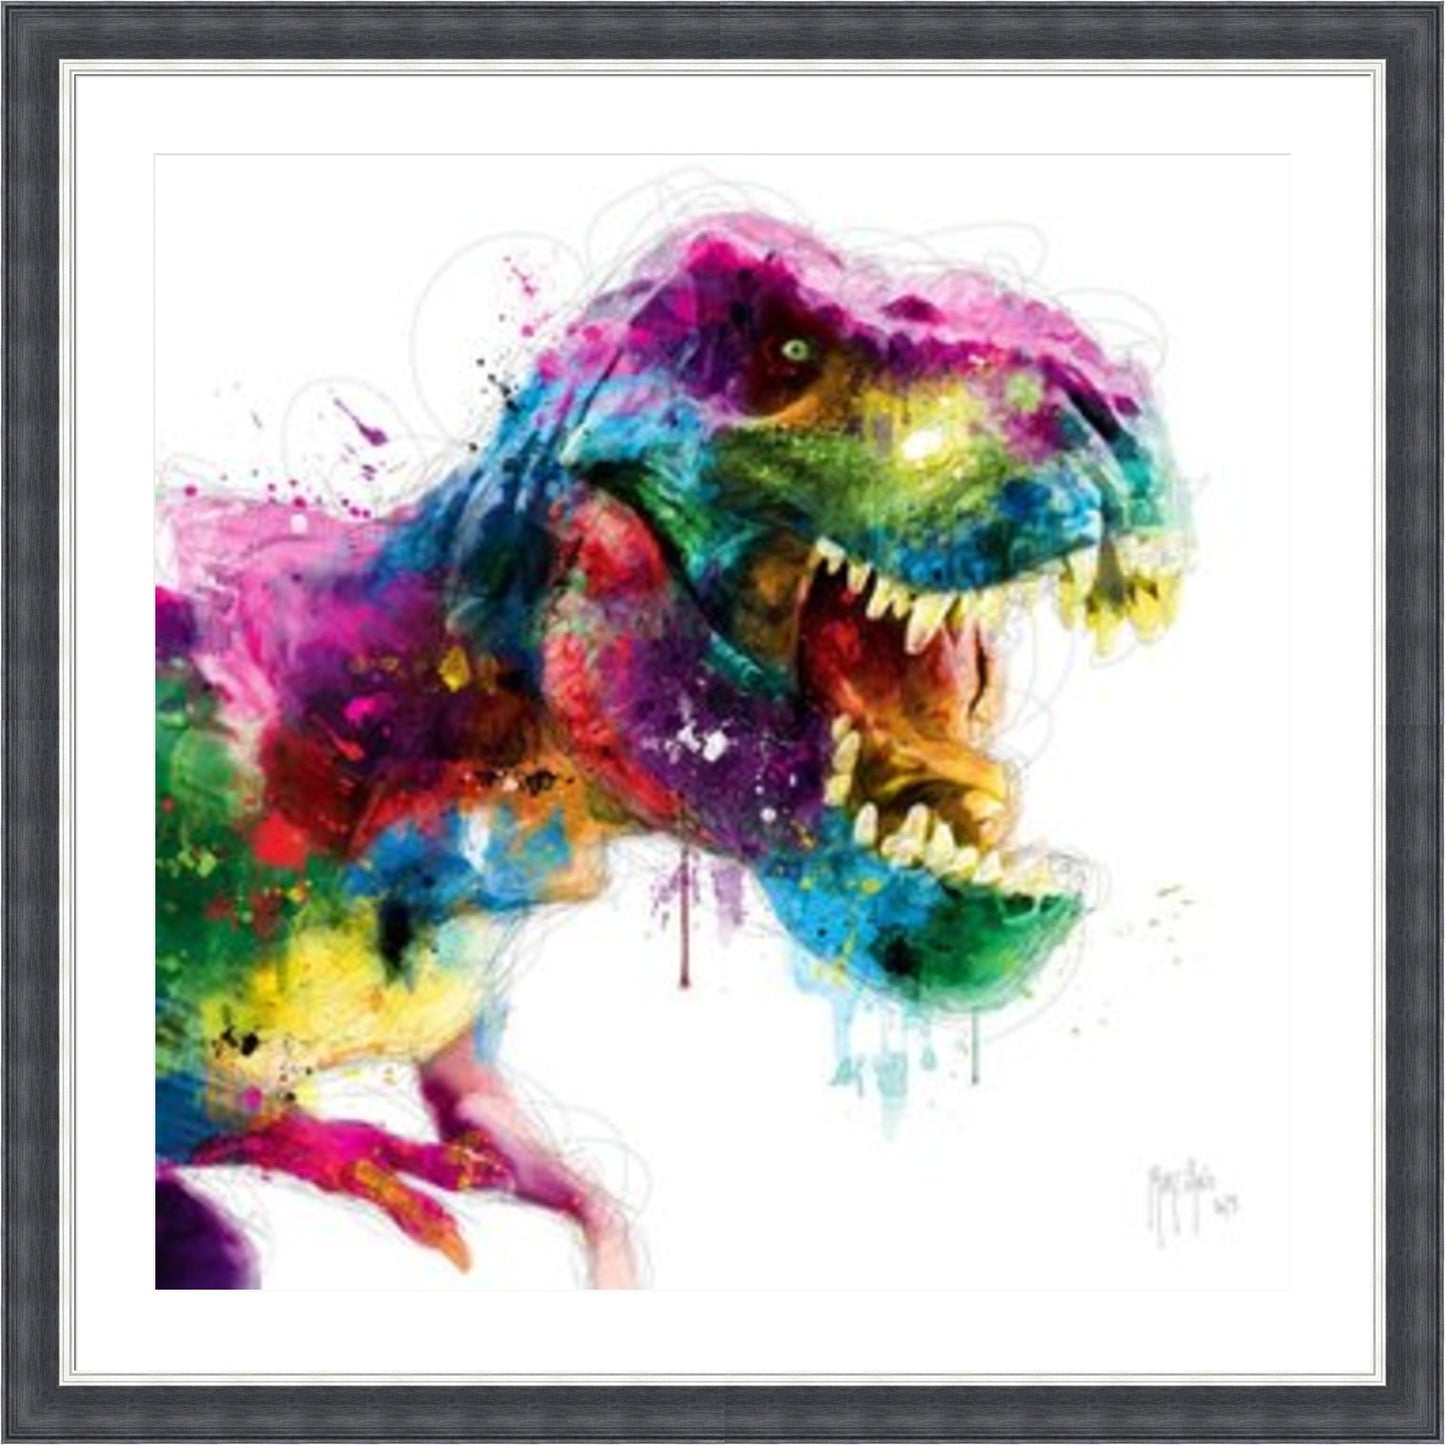 Jurassic Pop (Special Edition) by Patrice Murciano